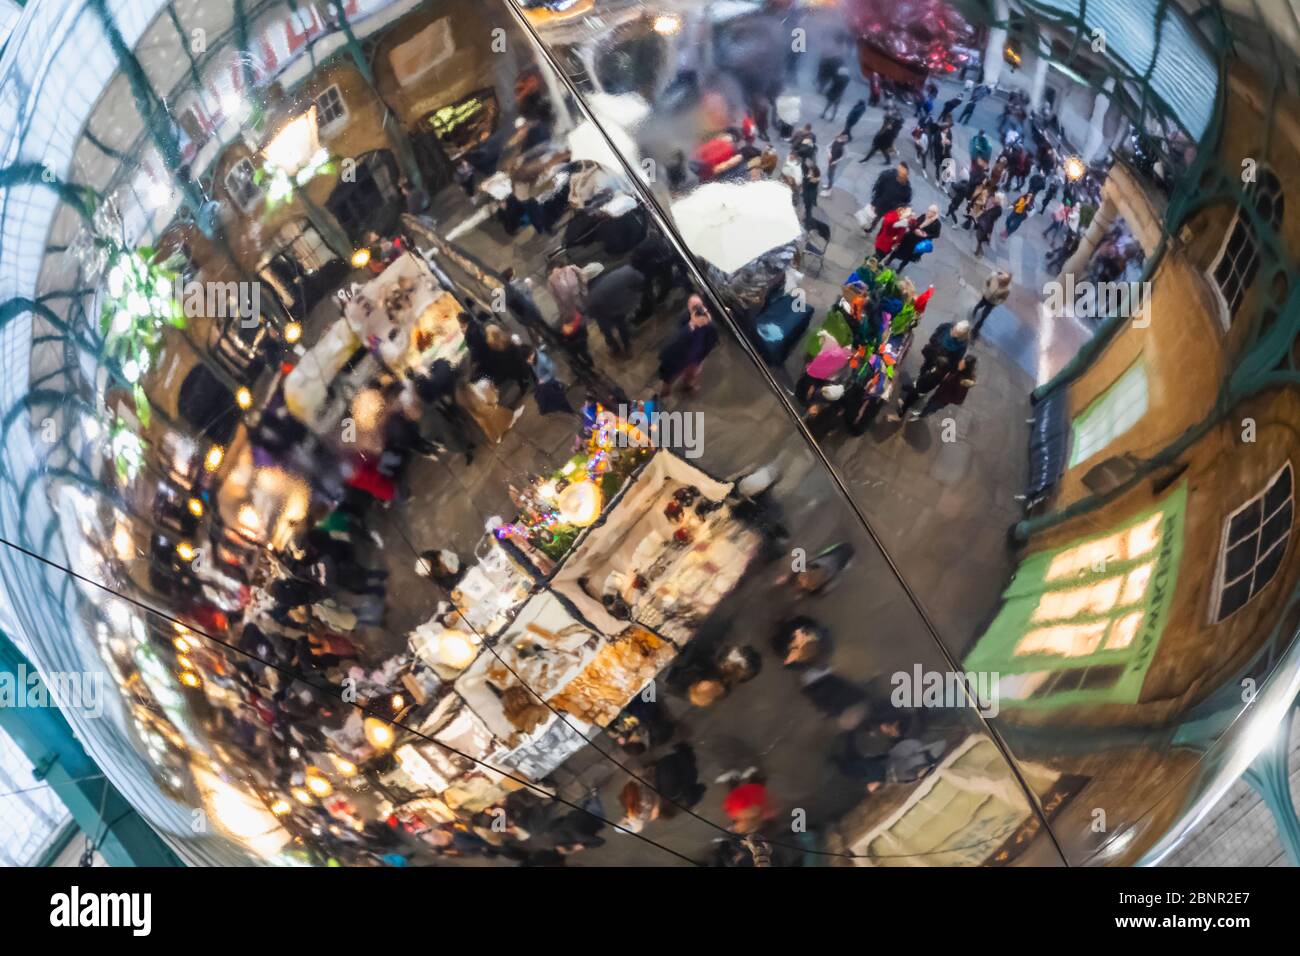 England, London, Covent Garden, Reflections in Globe of The Apple Market Stock Photo